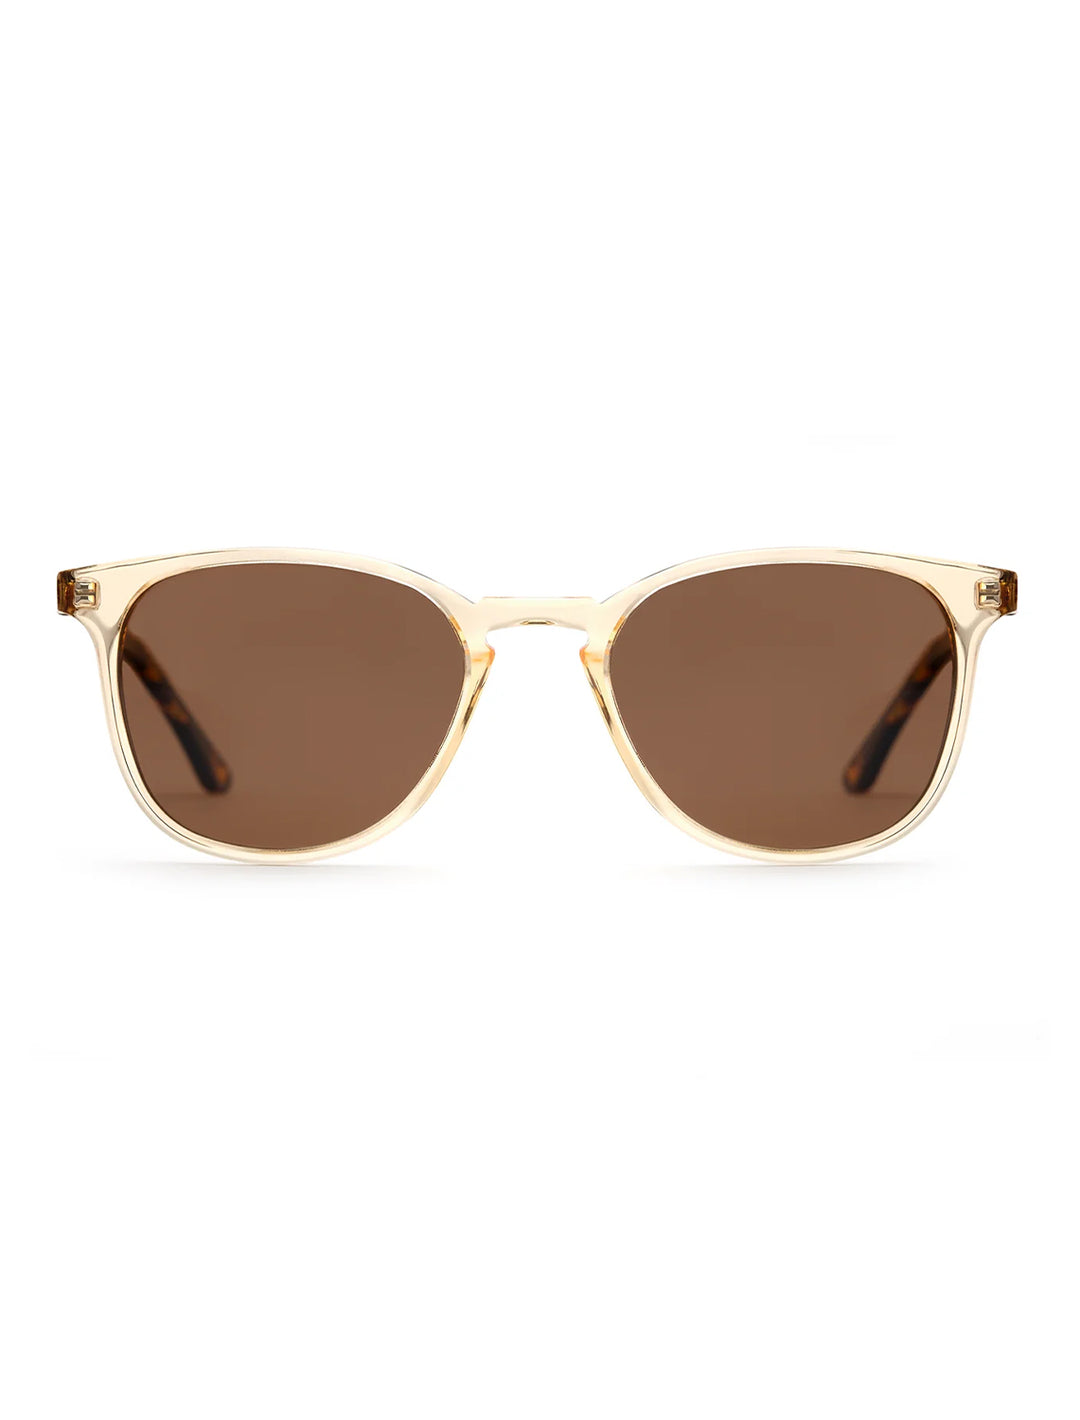 Front view of Krewe's olivier | champagne + rue tortoise polarized.